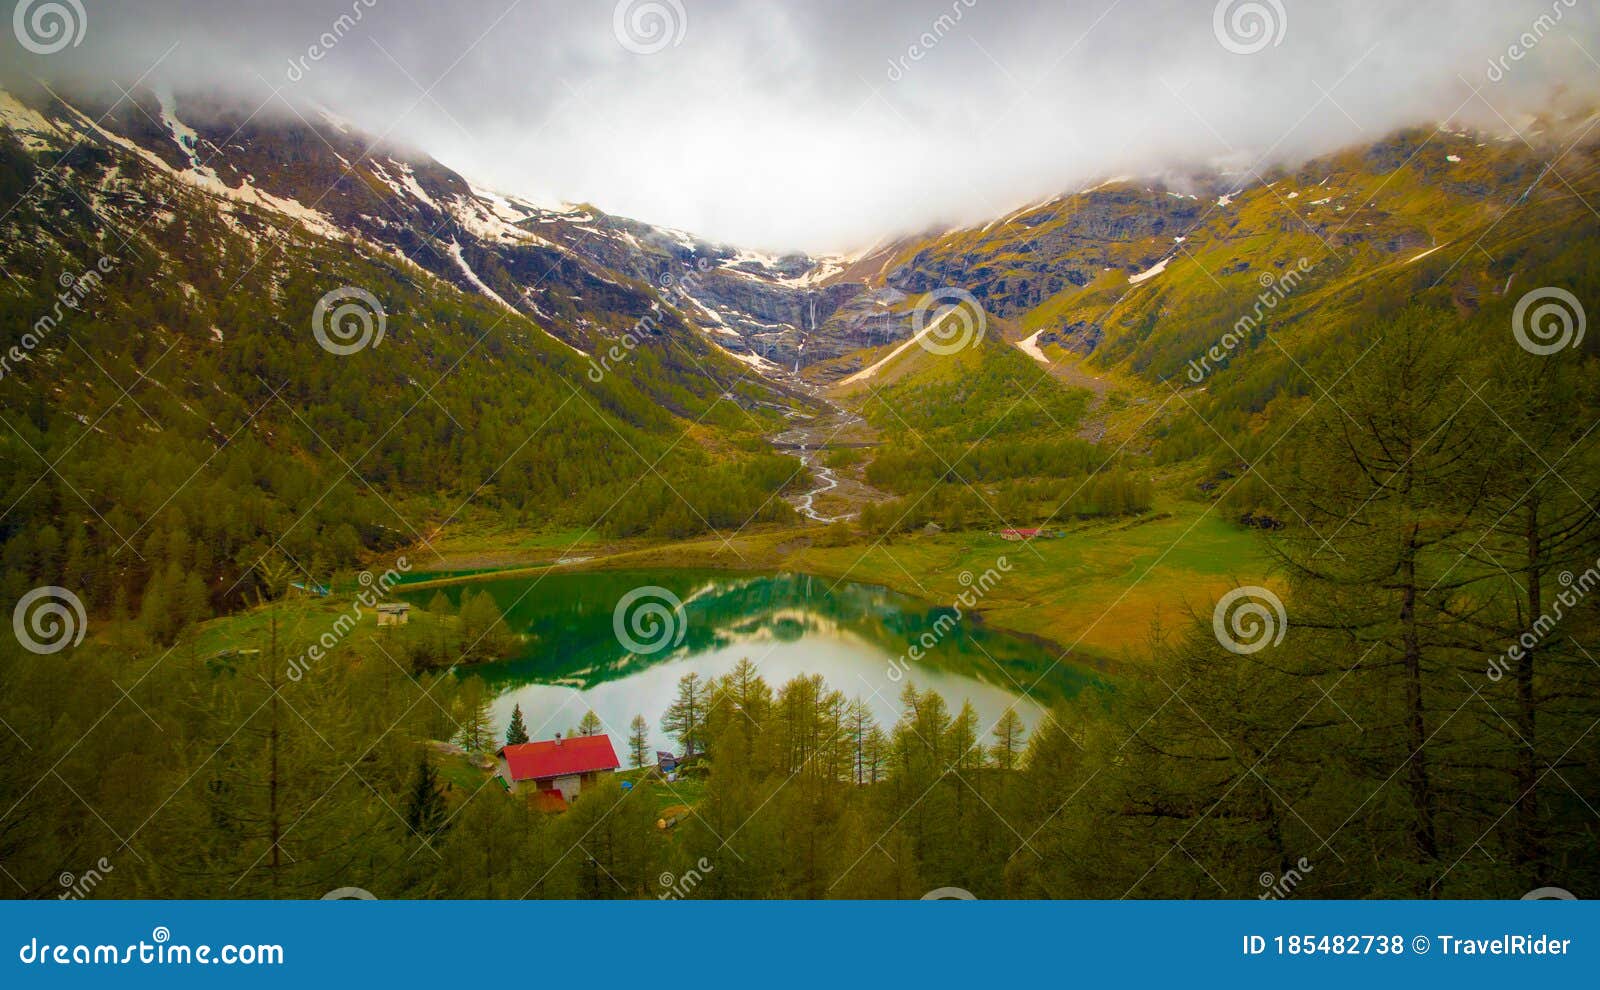 Mystical and Marvelous View of the in Alps Valley between Mountains and Green Trees Photo Image of marvelous, outdoor: 185482738